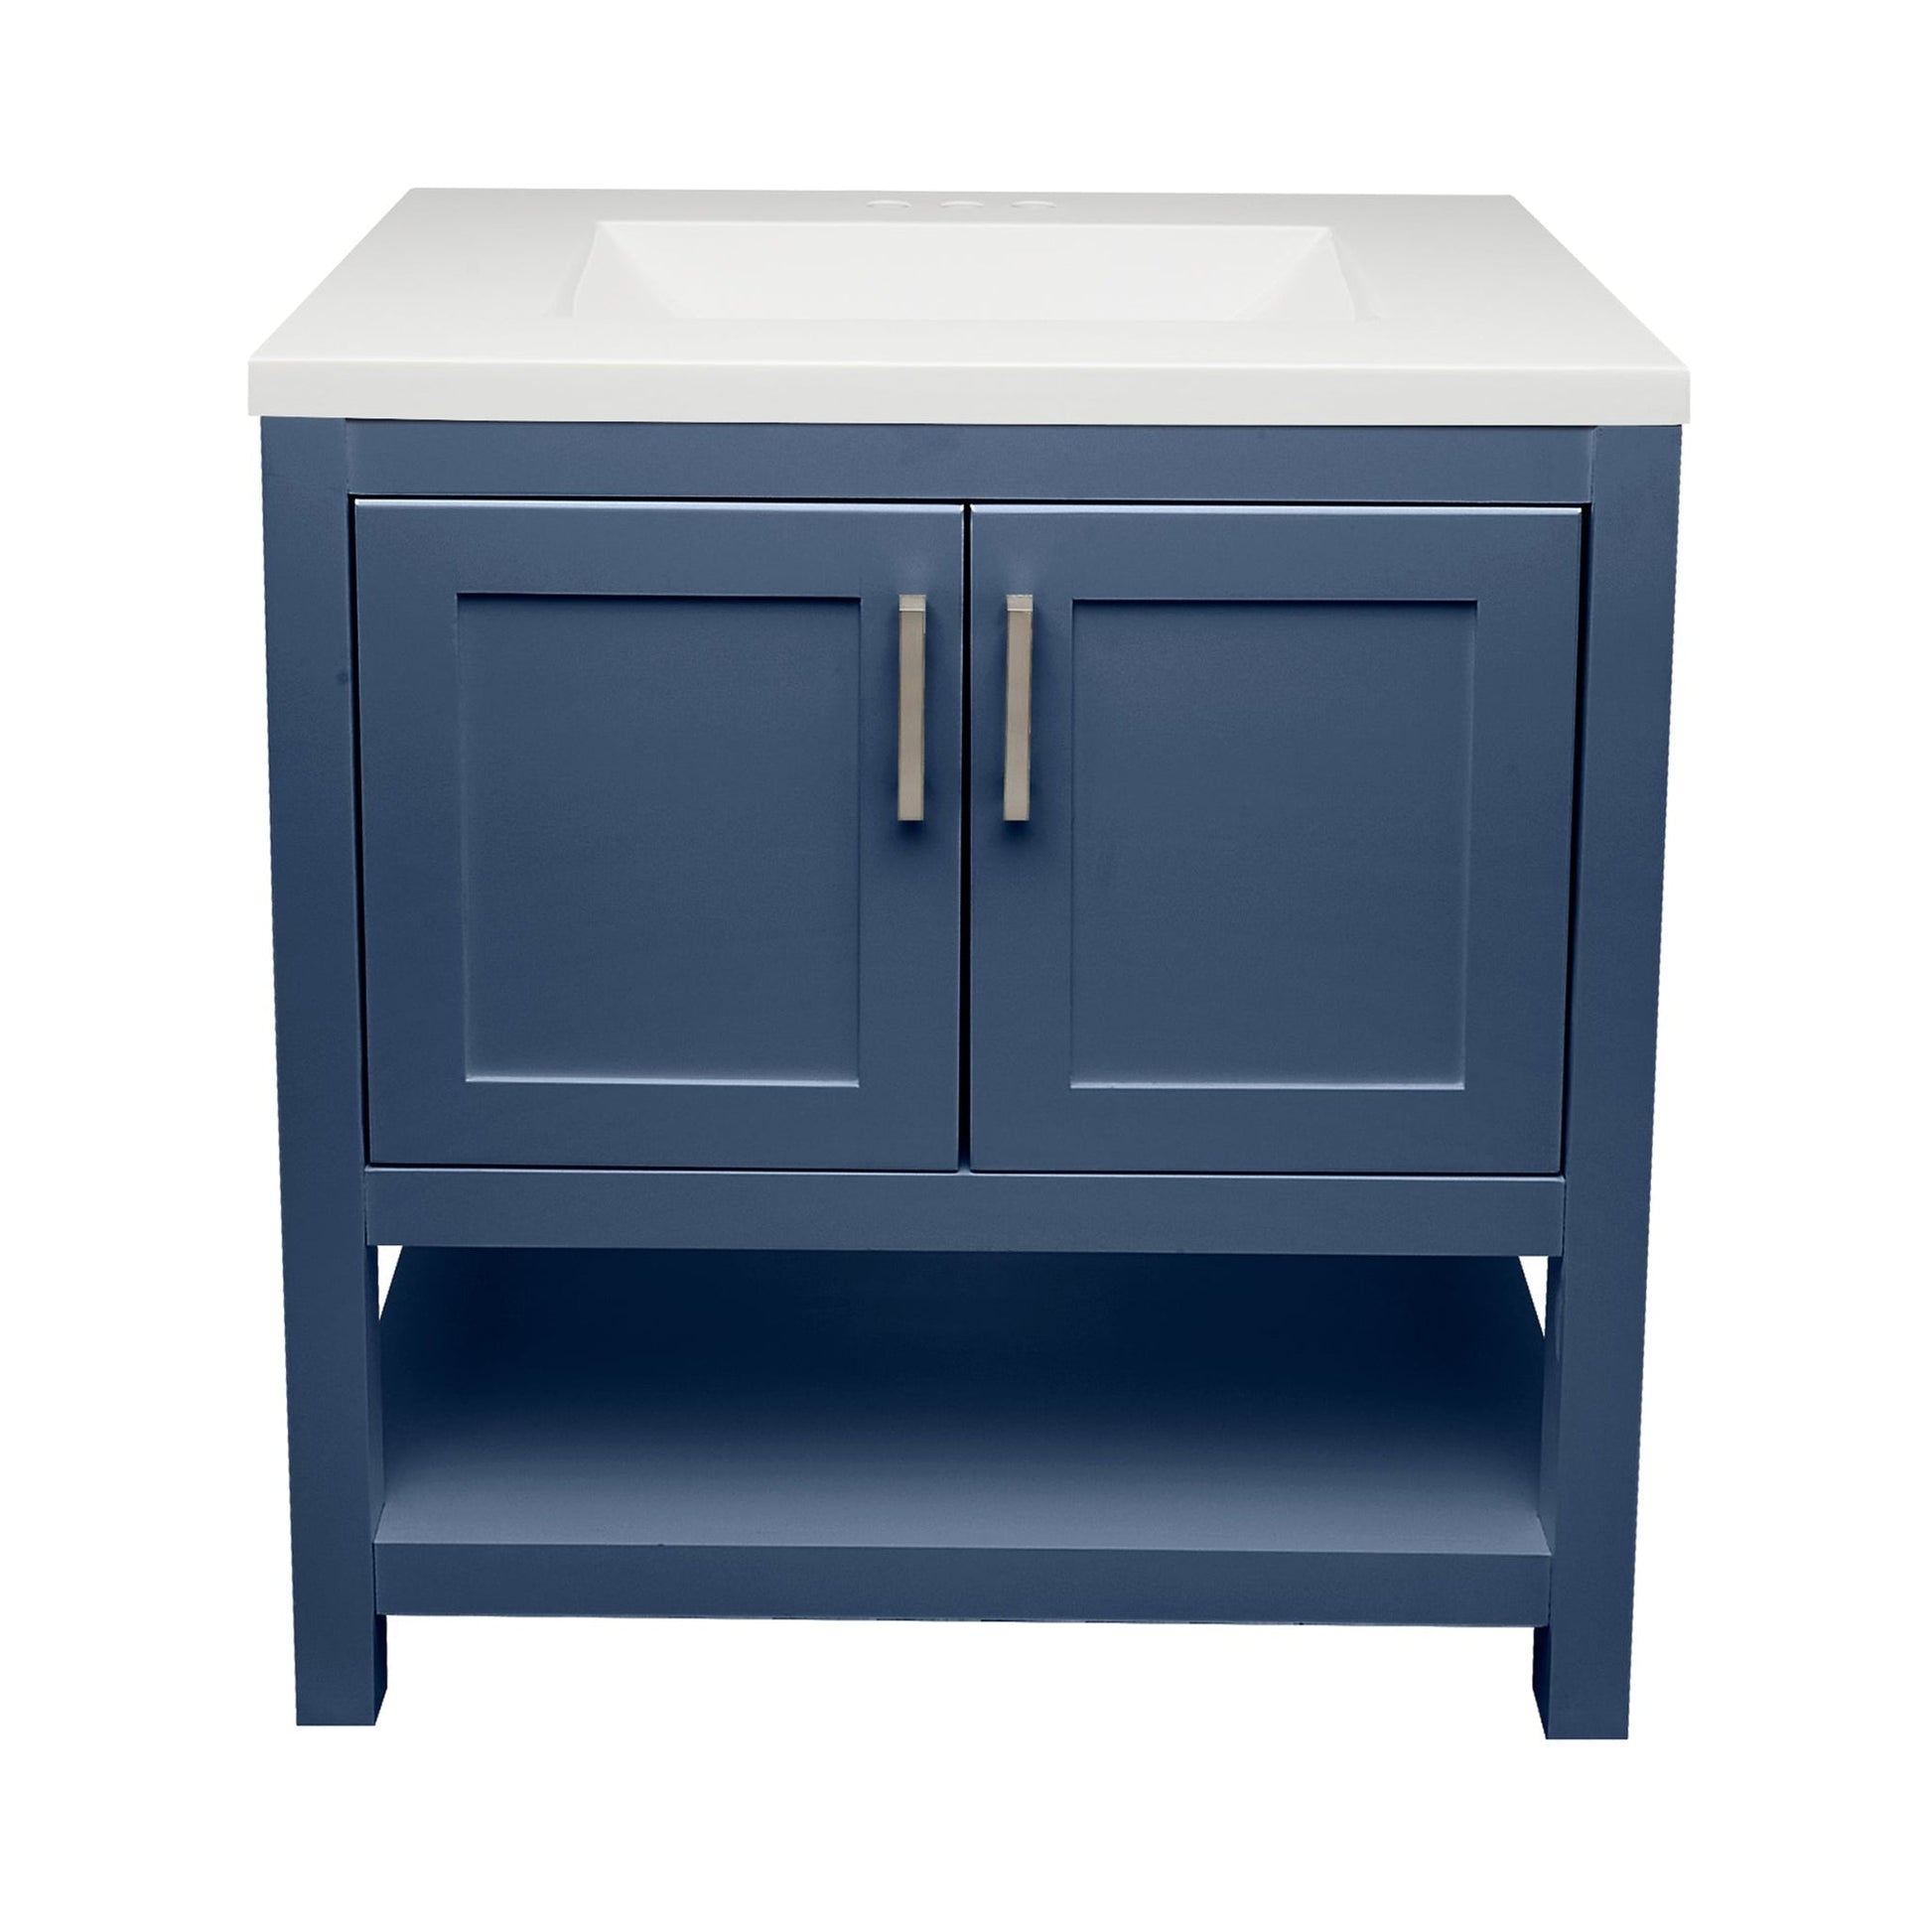 Ella's Bubbles Taos 31" Navy Blue Bathroom Vanity With White Cultured Marble Top and Sink